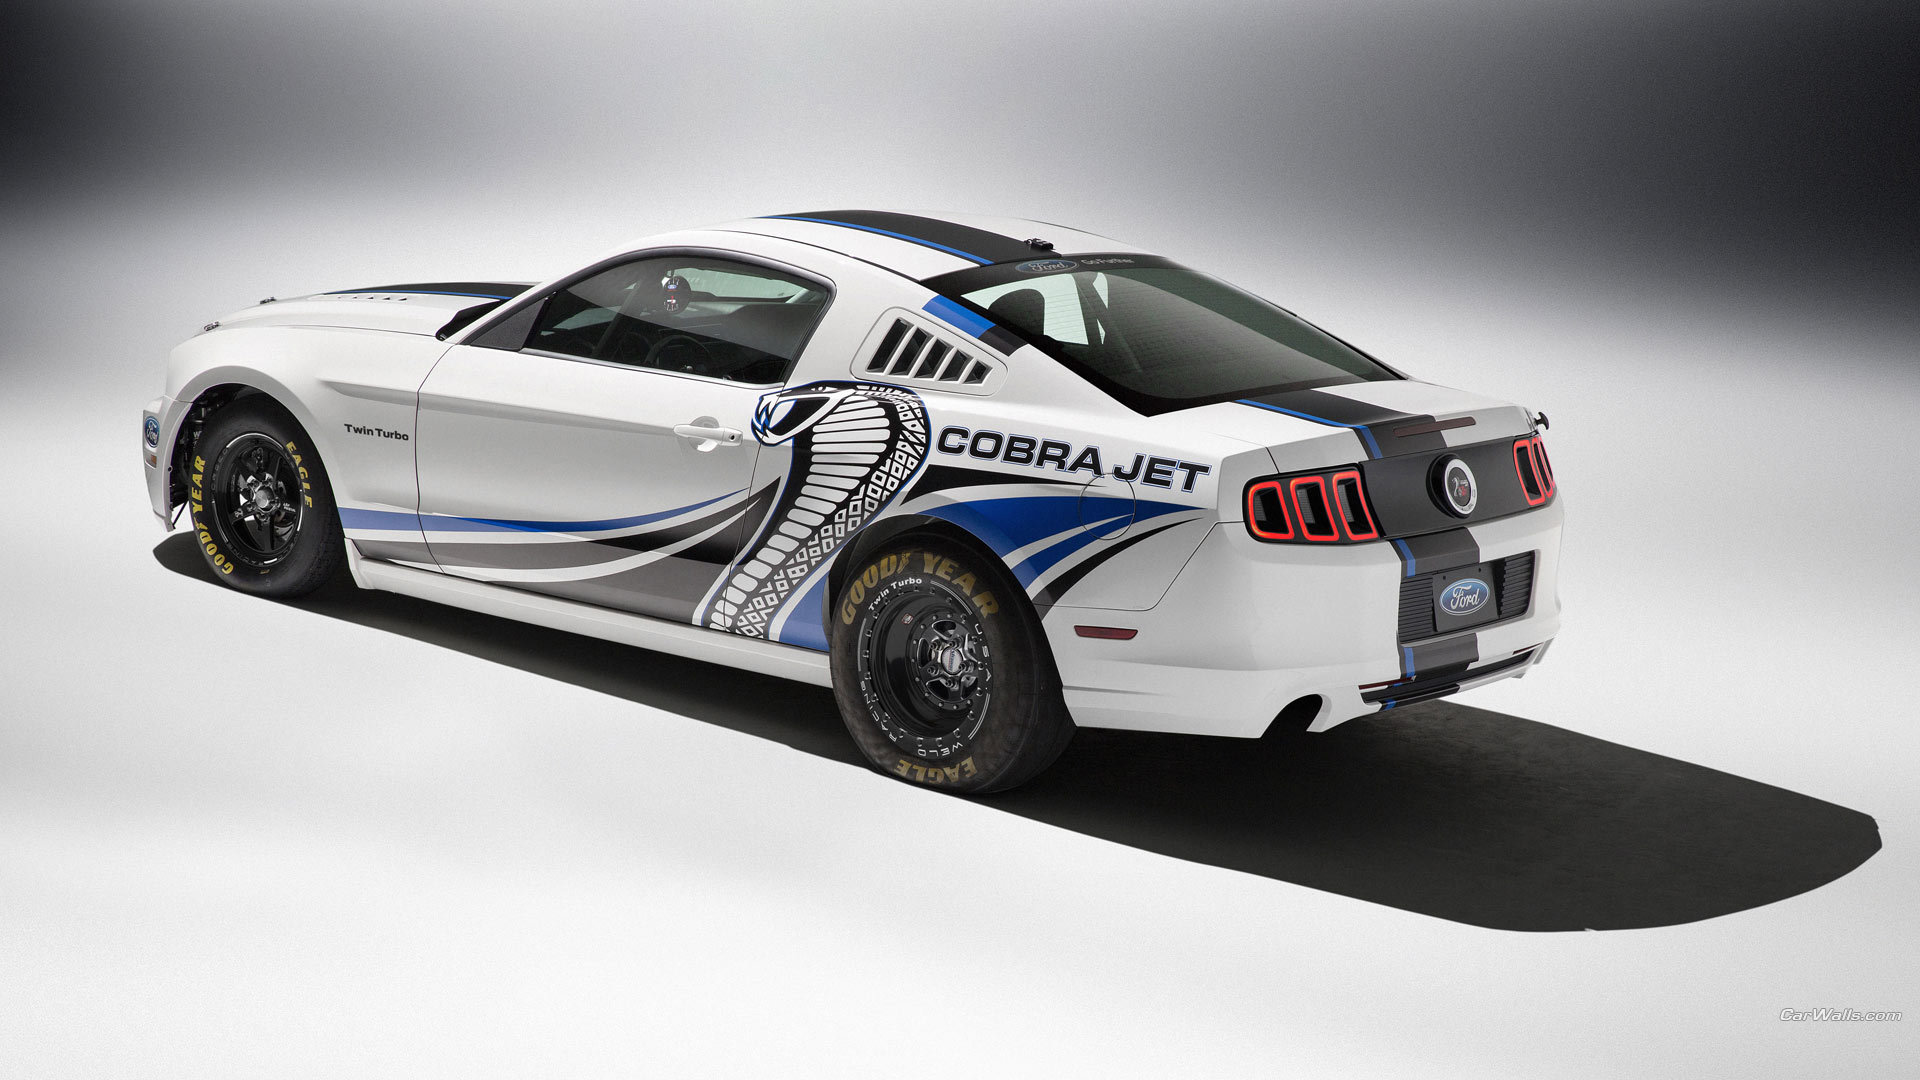 Download full hd Ford Mustang Cobra Jet Twin-turbo desktop background ID:239780 for free